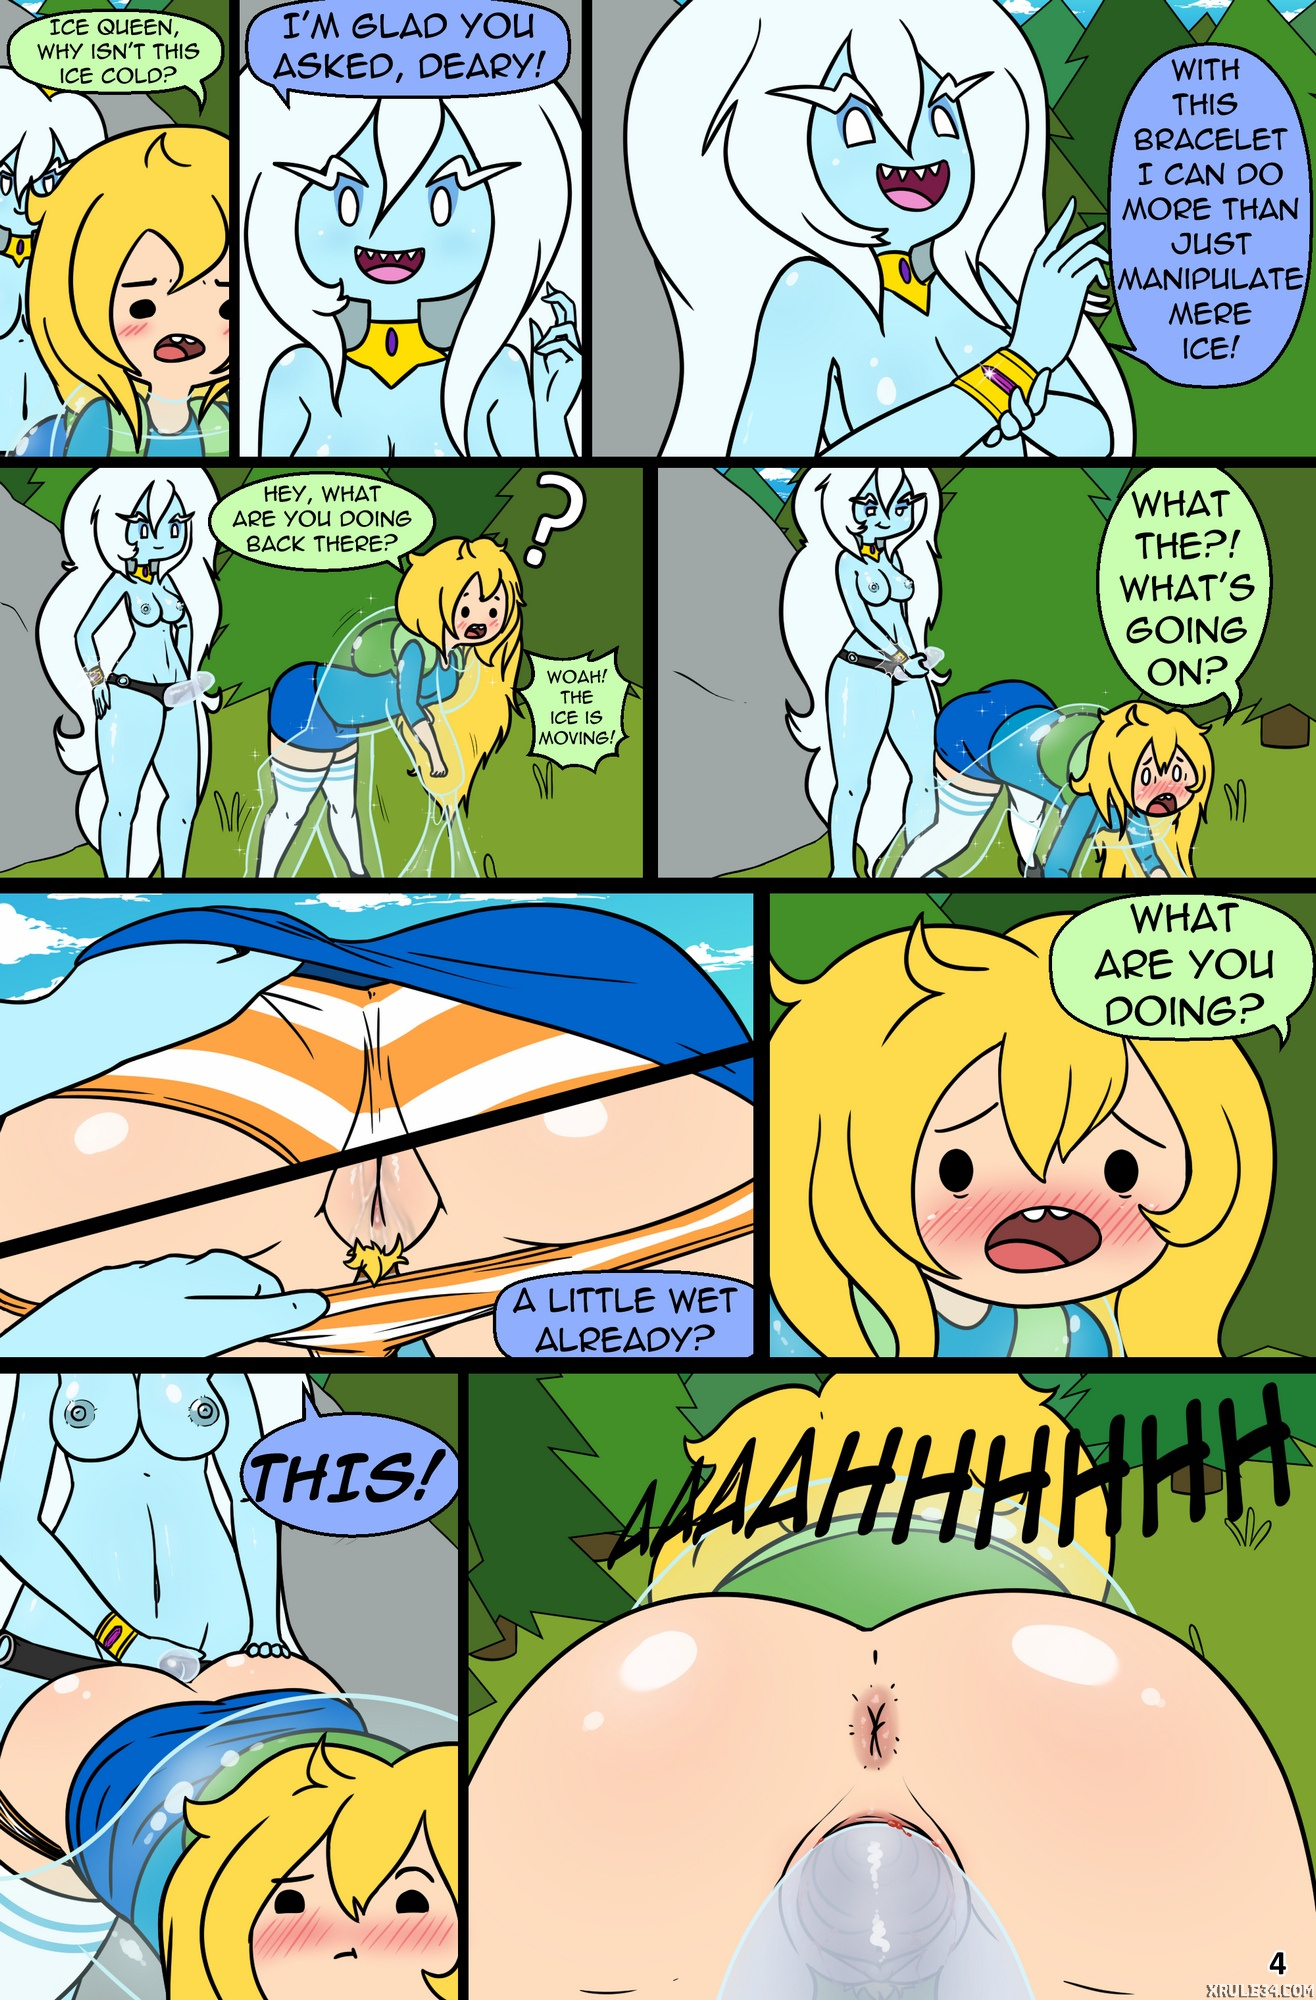 Fionna From Adventure Time Porn - Adventure Time Porn Fiona Blowjob | Sex Pictures Pass